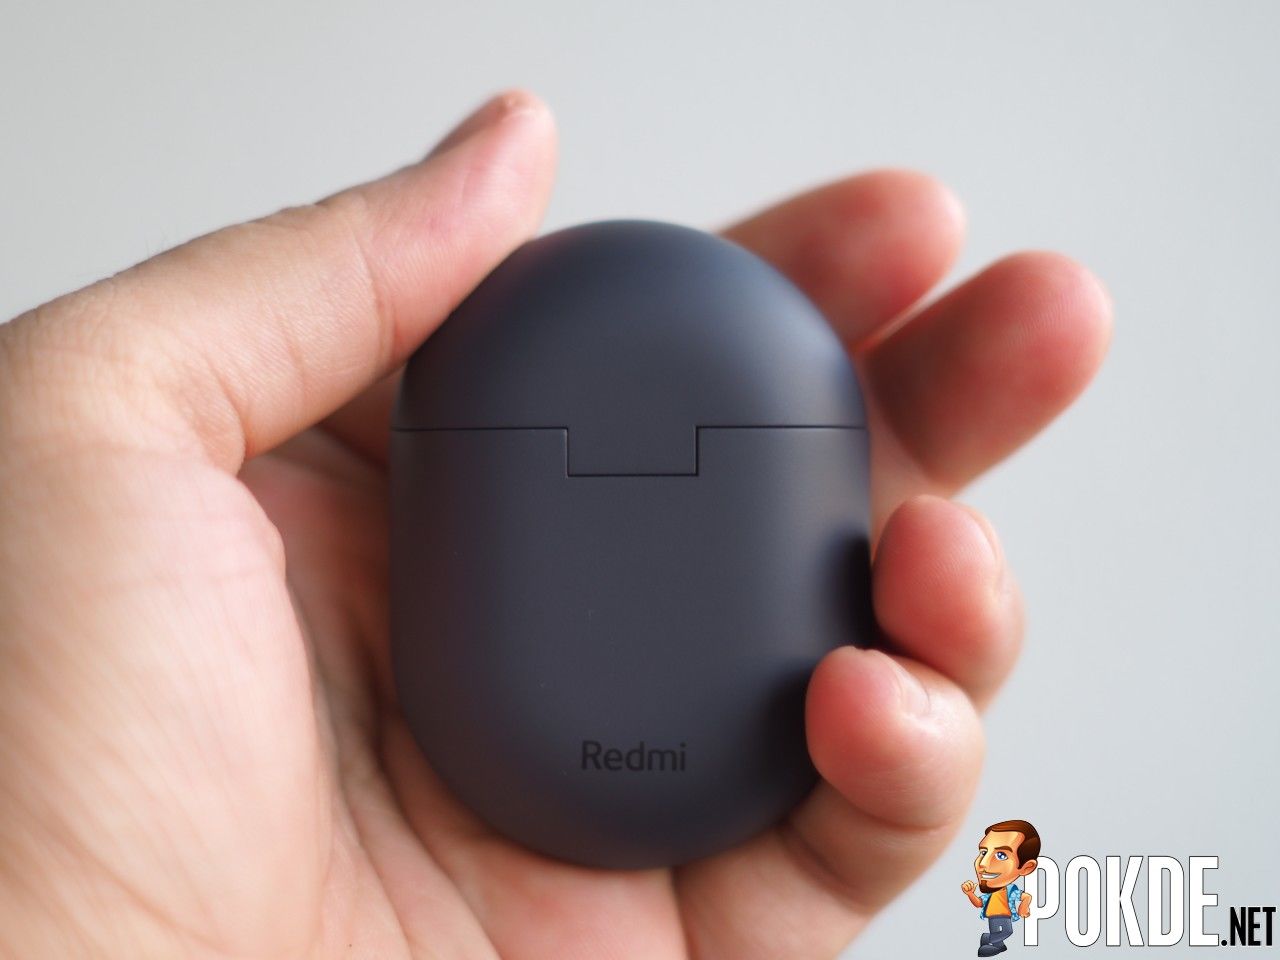 Redmi Buds 3 Pro Review - You Can't Beat This Value –